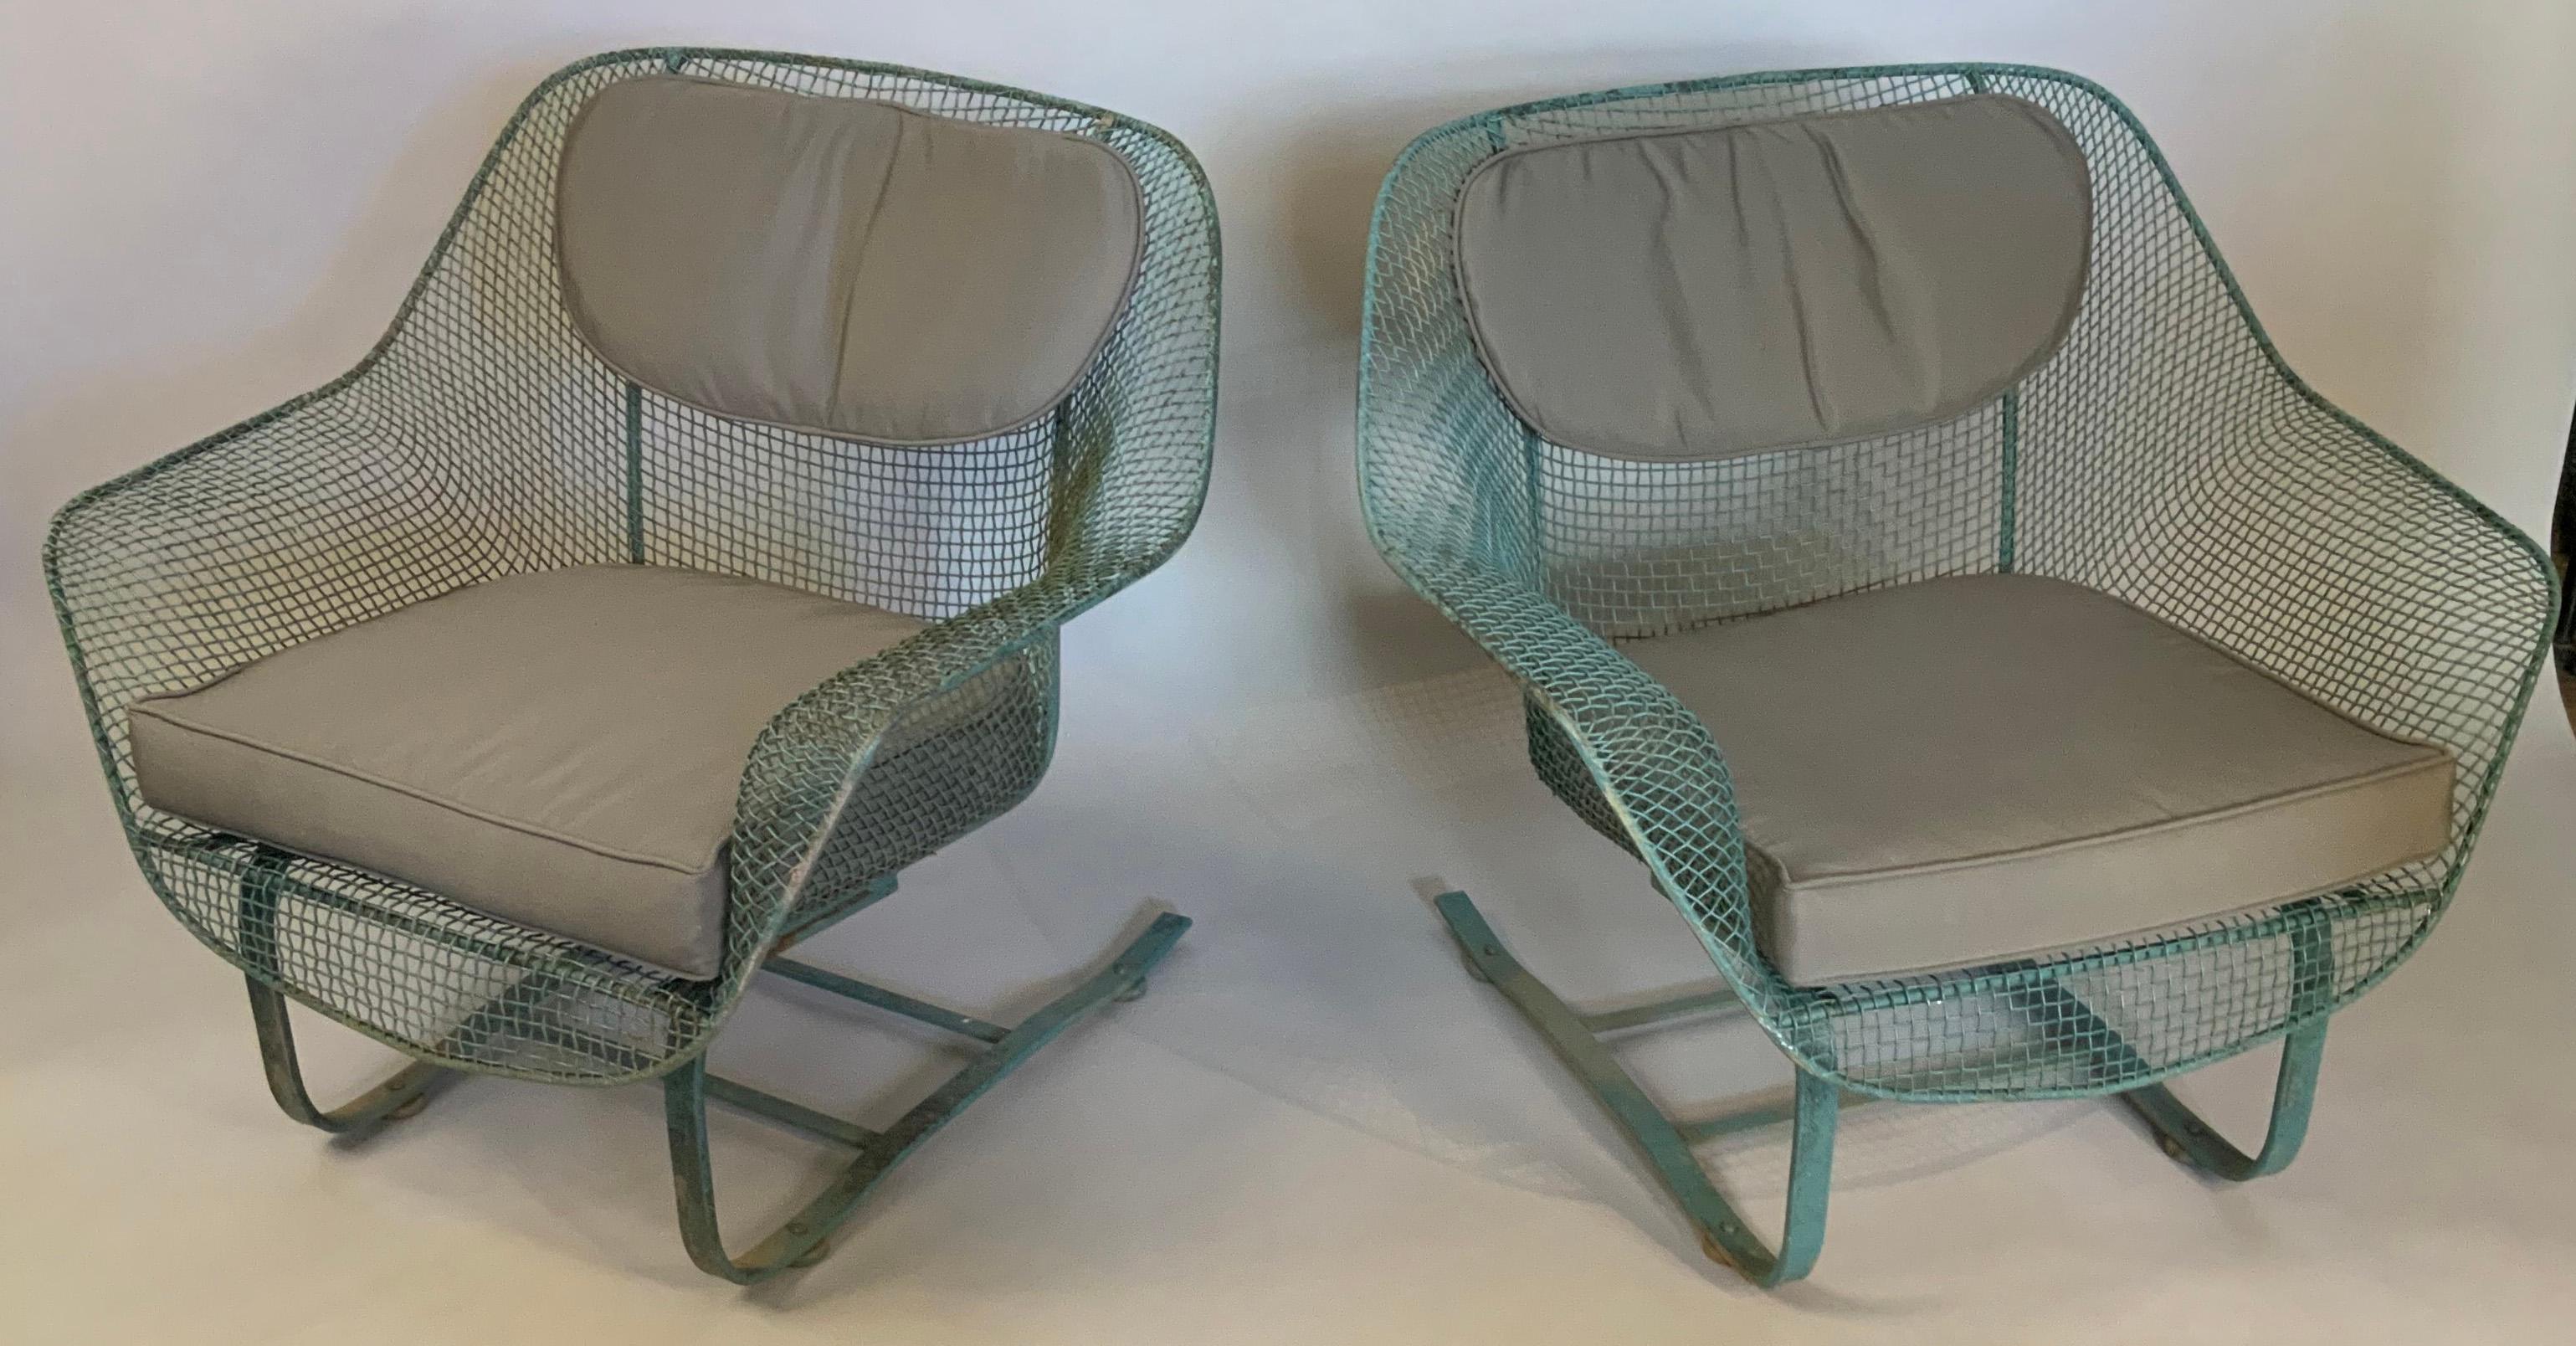 A pair of Classic vintage 1950s 'Sculptura' garden Lounge chairs by Russell Woodard. The most comfortable and desirable of Russell Woodard's Classic and iconic 'Sculptura' collection, the lounge chair is formed entirely of woven steel mesh, mounted